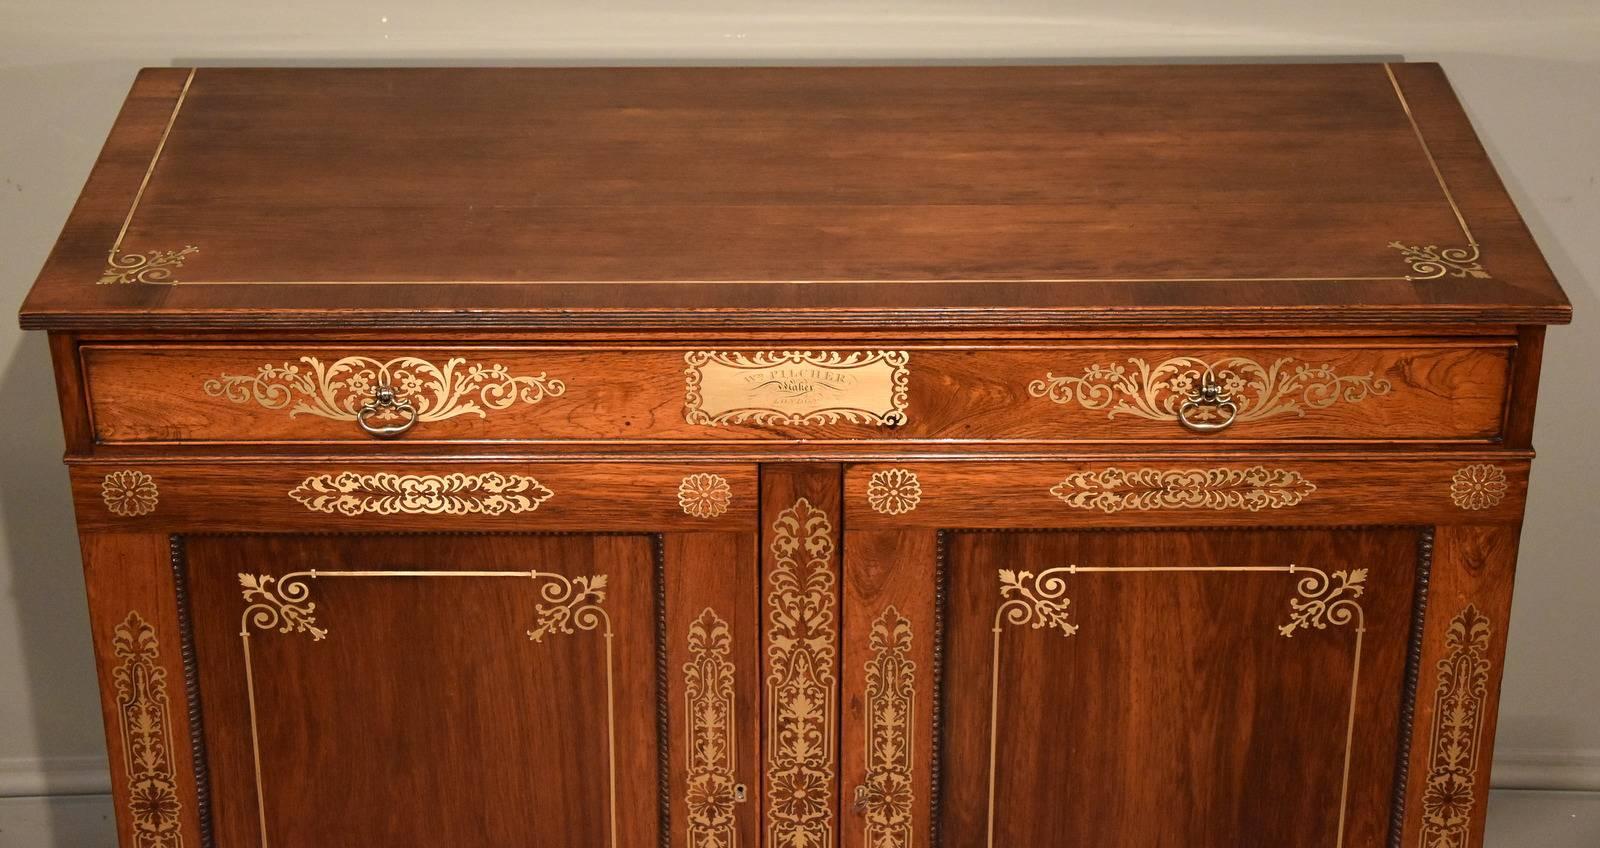 Fine Regency period rosewood brass inlaid side cabinet by Pitcher. This piece is illustrated in Markey L& N furniture by C Gilbert page 372 W M Picher London.

Dimensions:
Height 34